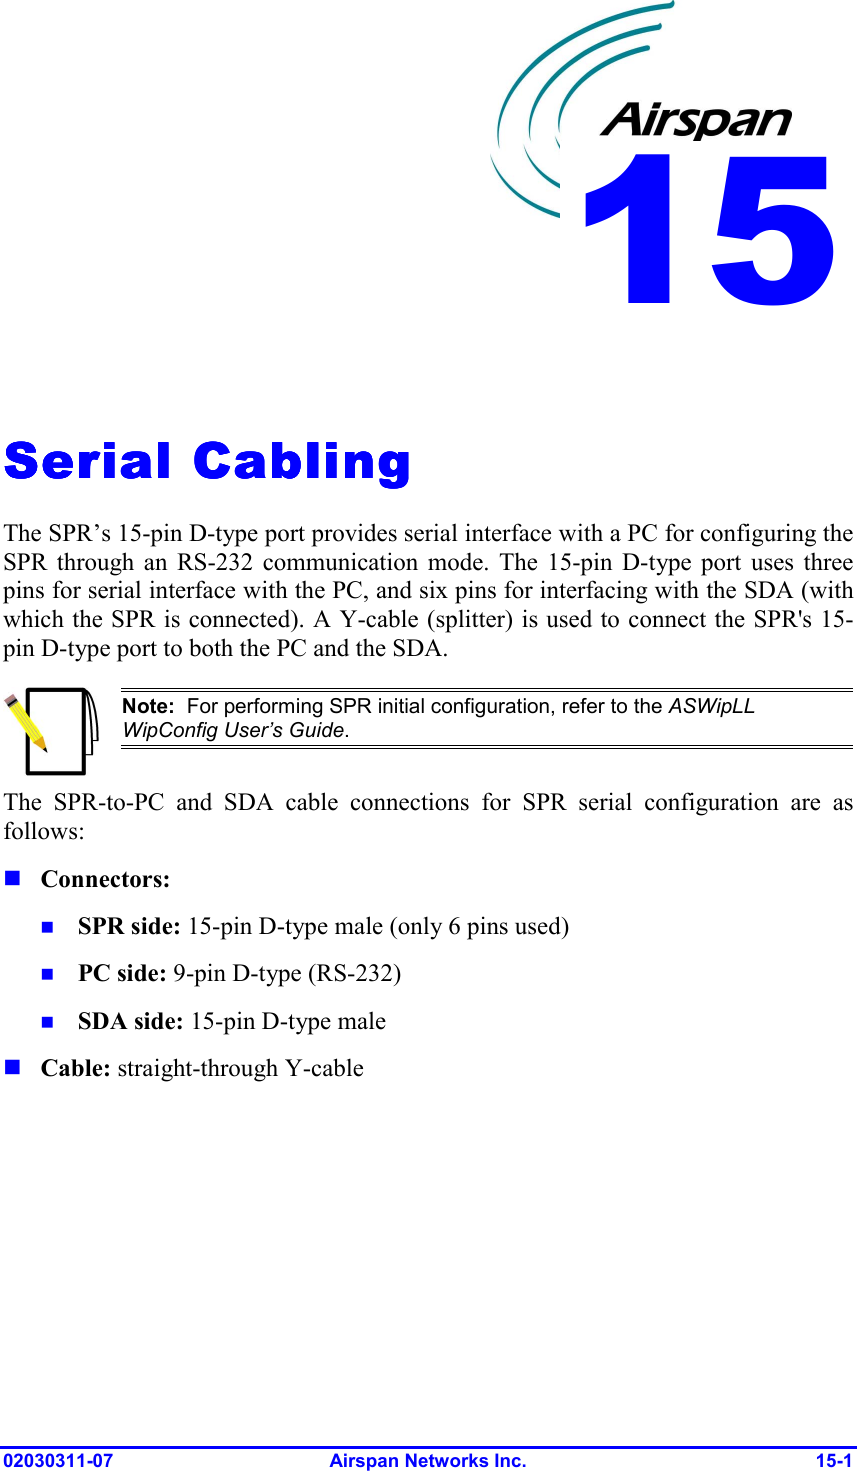  02030311-07 Airspan Networks Inc.  15-1   Serial CablingSerial CablingSerial CablingSerial Cabling    The SPR’s 15-pin D-type port provides serial interface with a PC for configuring the SPR through an RS-232 communication mode. The 15-pin D-type port uses three pins for serial interface with the PC, and six pins for interfacing with the SDA (with which the SPR is connected). A Y-cable (splitter) is used to connect the SPR&apos;s 15-pin D-type port to both the PC and the SDA.  Note:  For performing SPR initial configuration, refer to the ASWipLL WipConfig User’s Guide. The SPR-to-PC and SDA cable connections for SPR serial configuration are as follows: ! Connectors: !  SPR side: 15-pin D-type male (only 6 pins used) !  PC side: 9-pin D-type (RS-232) !  SDA side: 15-pin D-type male ! Cable: straight-through Y-cable 15